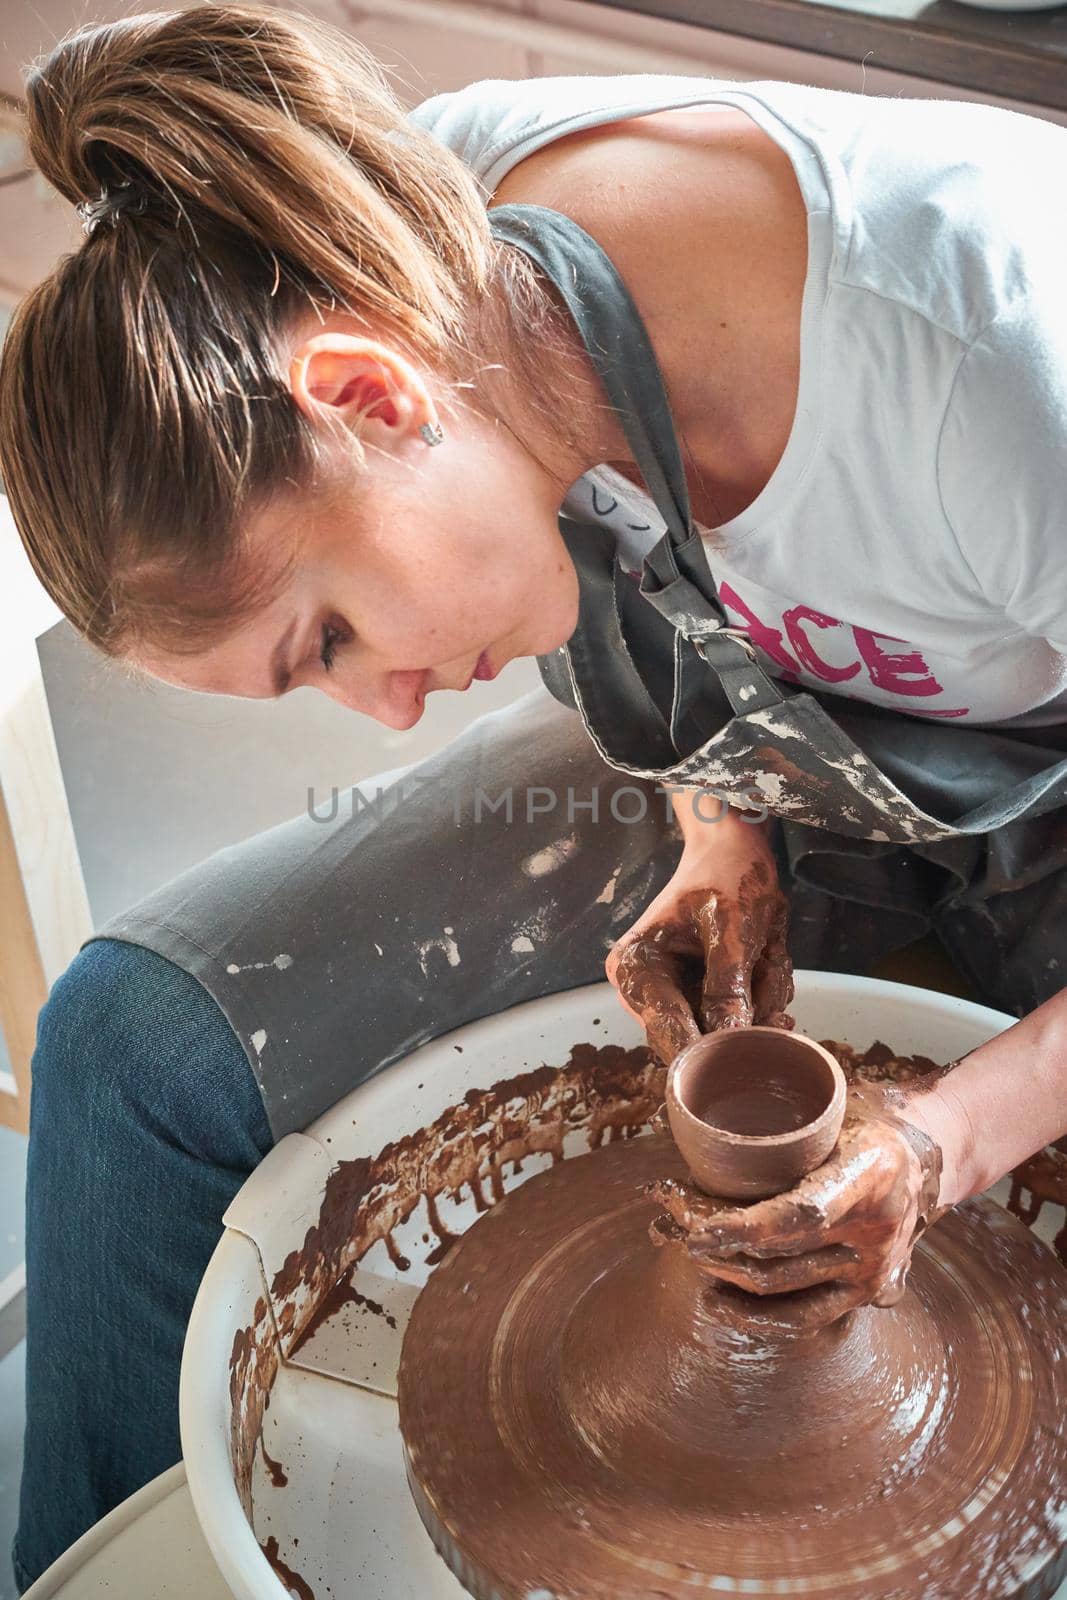 Woman freelance, business, hobby. Woman making ceramic pottery by NataBene